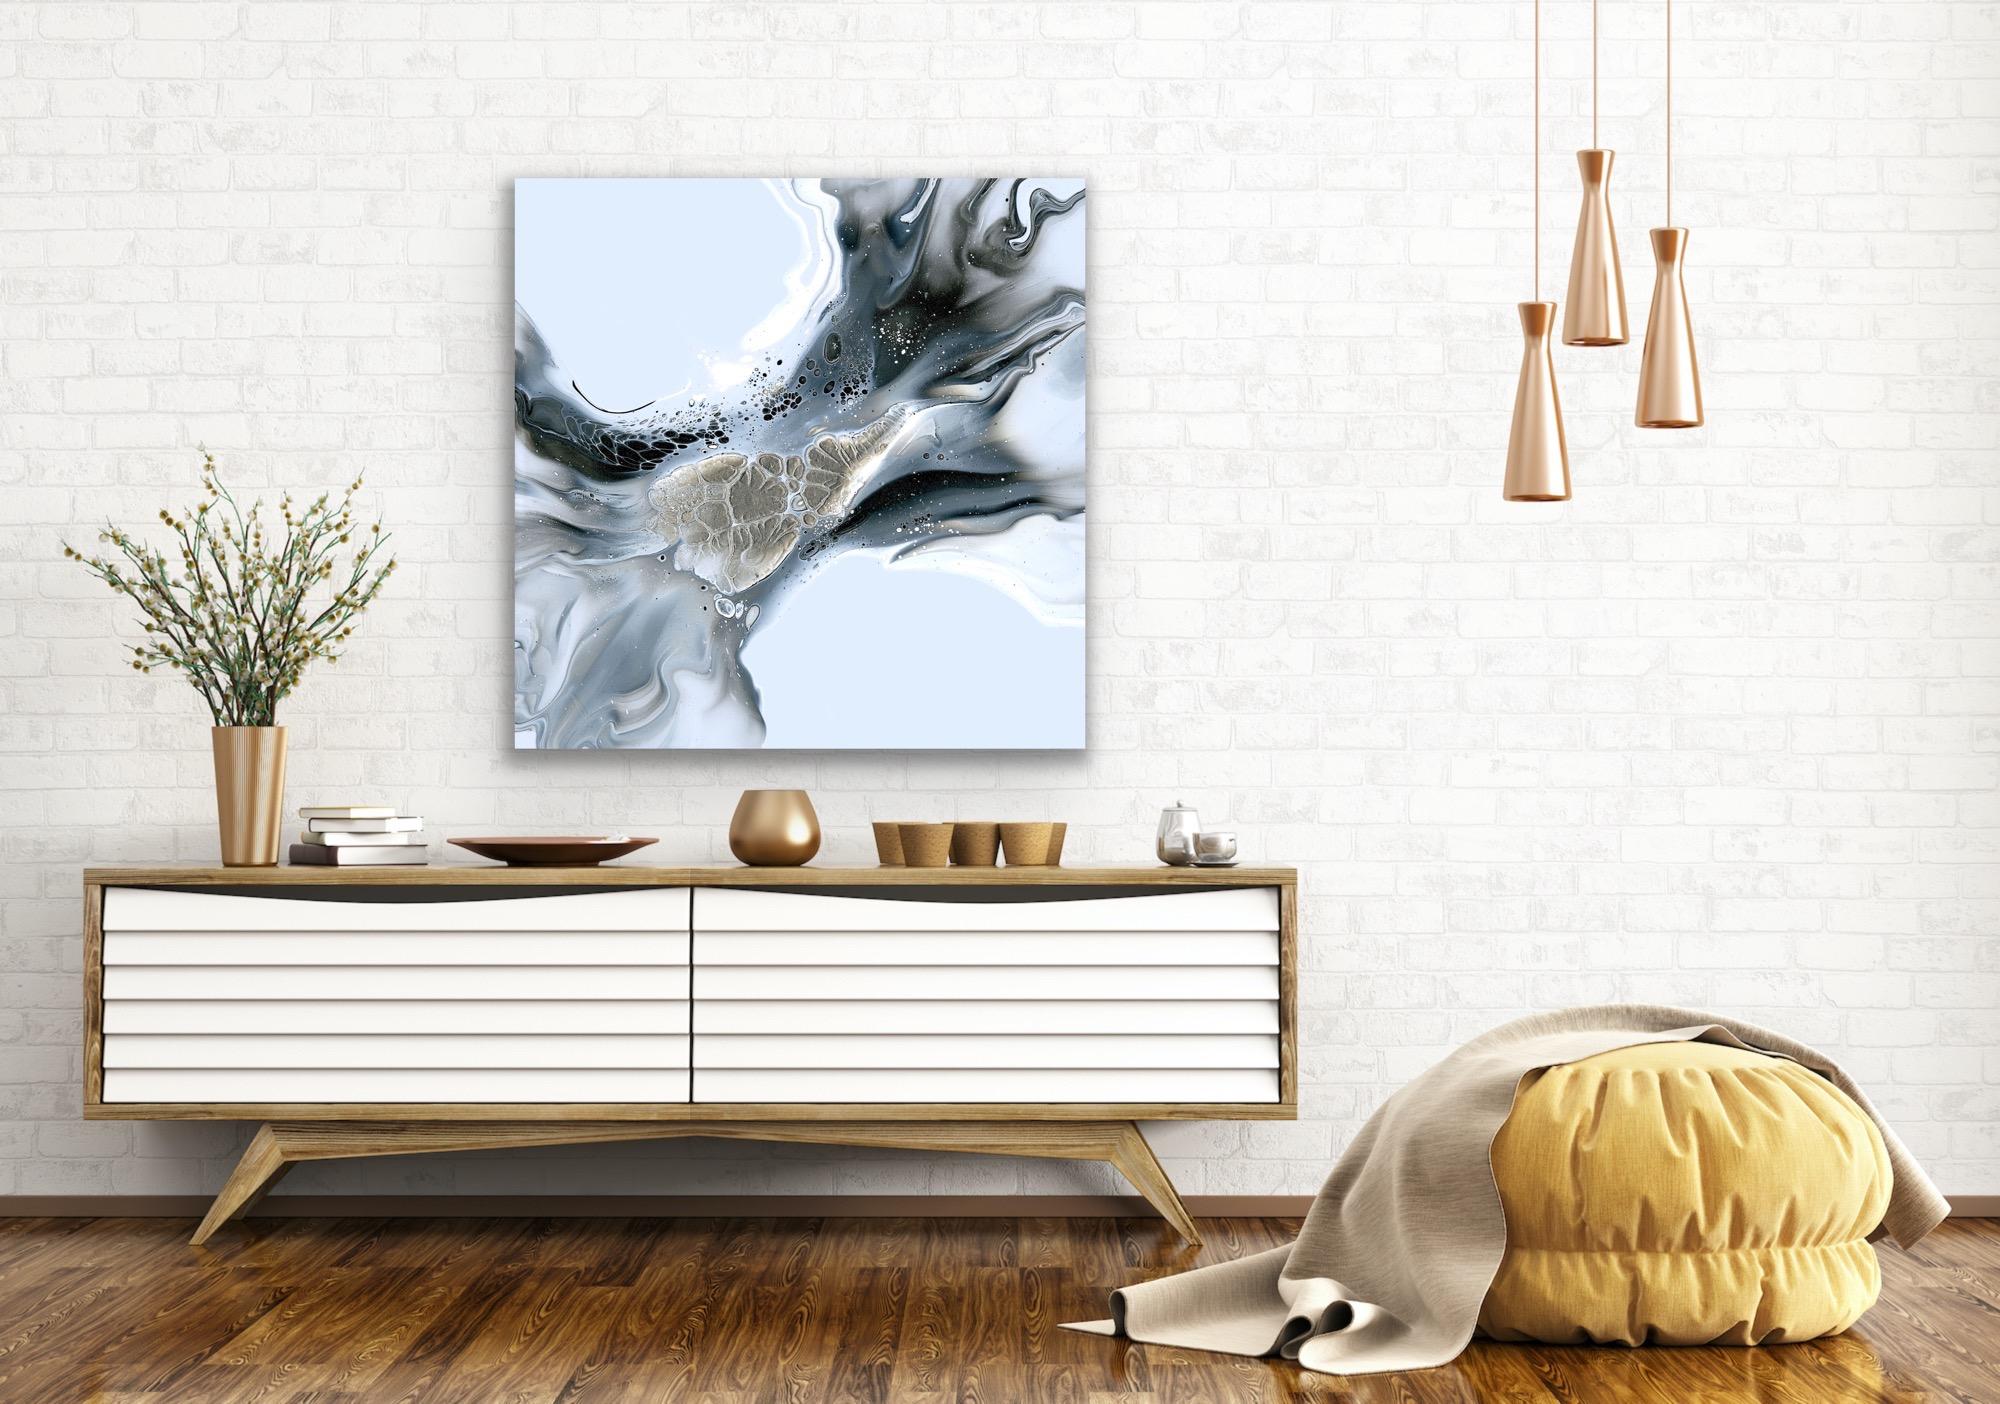 Abstract Contemporary Painting, Large Modern Giclee Print, LE Signed by artist. - Gray Abstract Painting by Celeste Reiter